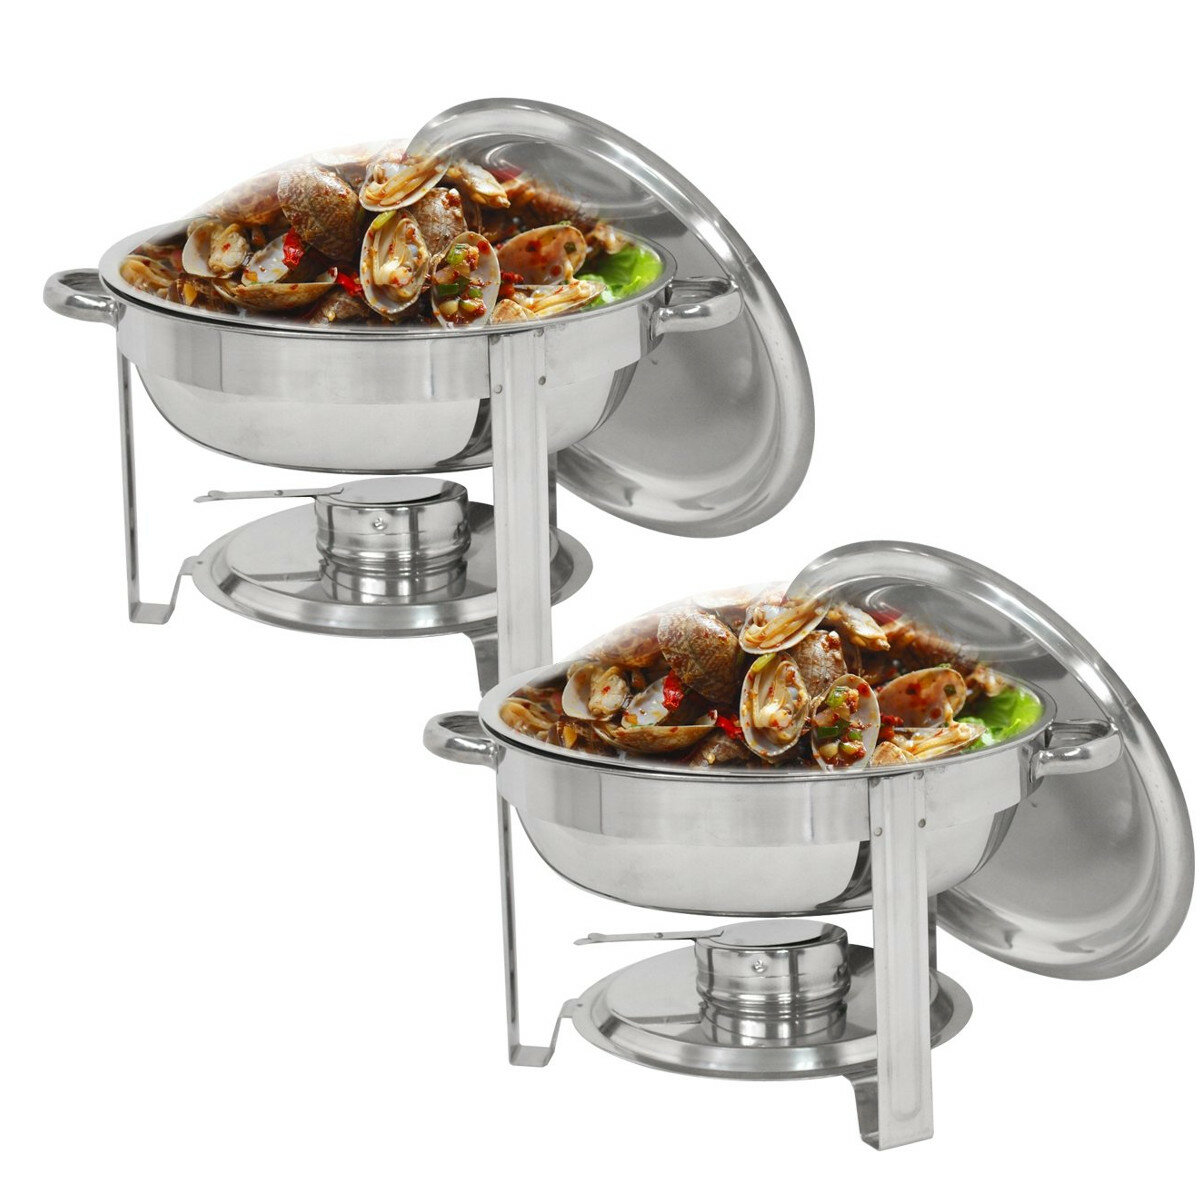 Image of Tooca 2pcs Set Stainless Steel Dining Stove 2 Pack 4 Litre Cooker